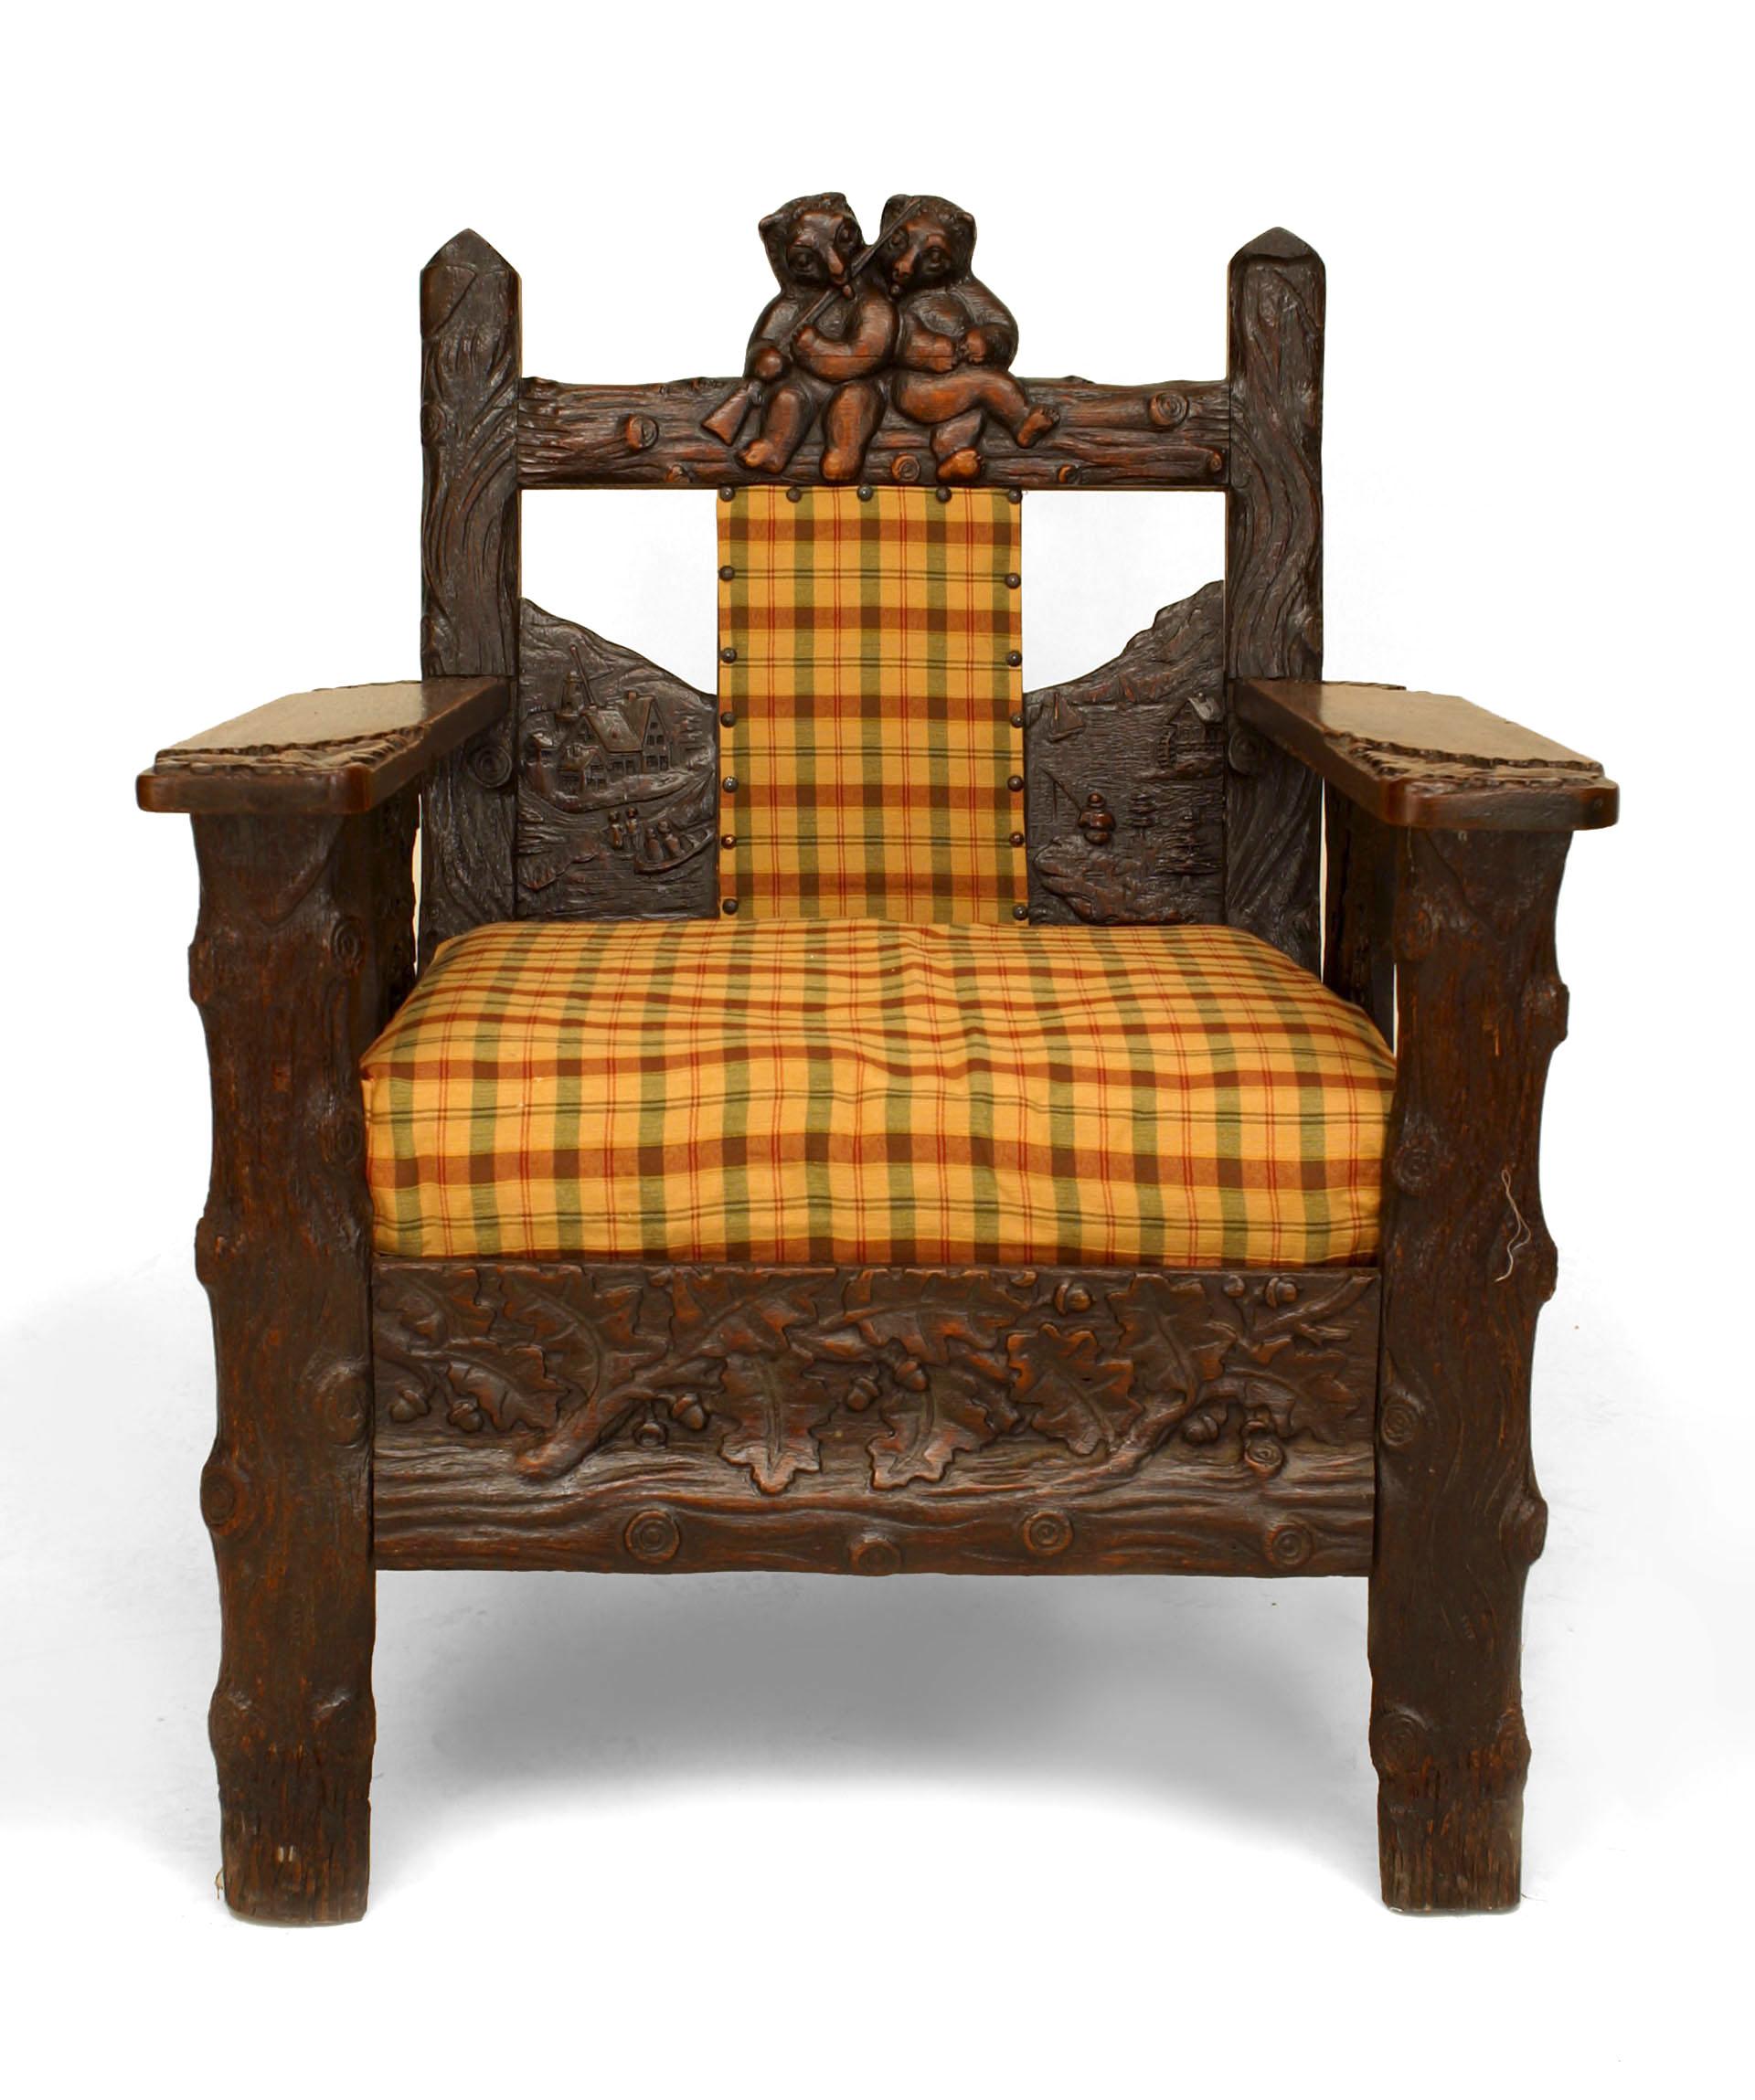 Rustic Black Forest style (19/20th Cent) oak arm chair with 2 carved bears on top of back along with country scenes & oak leaves in relief with an upholstered seat & back panel.
